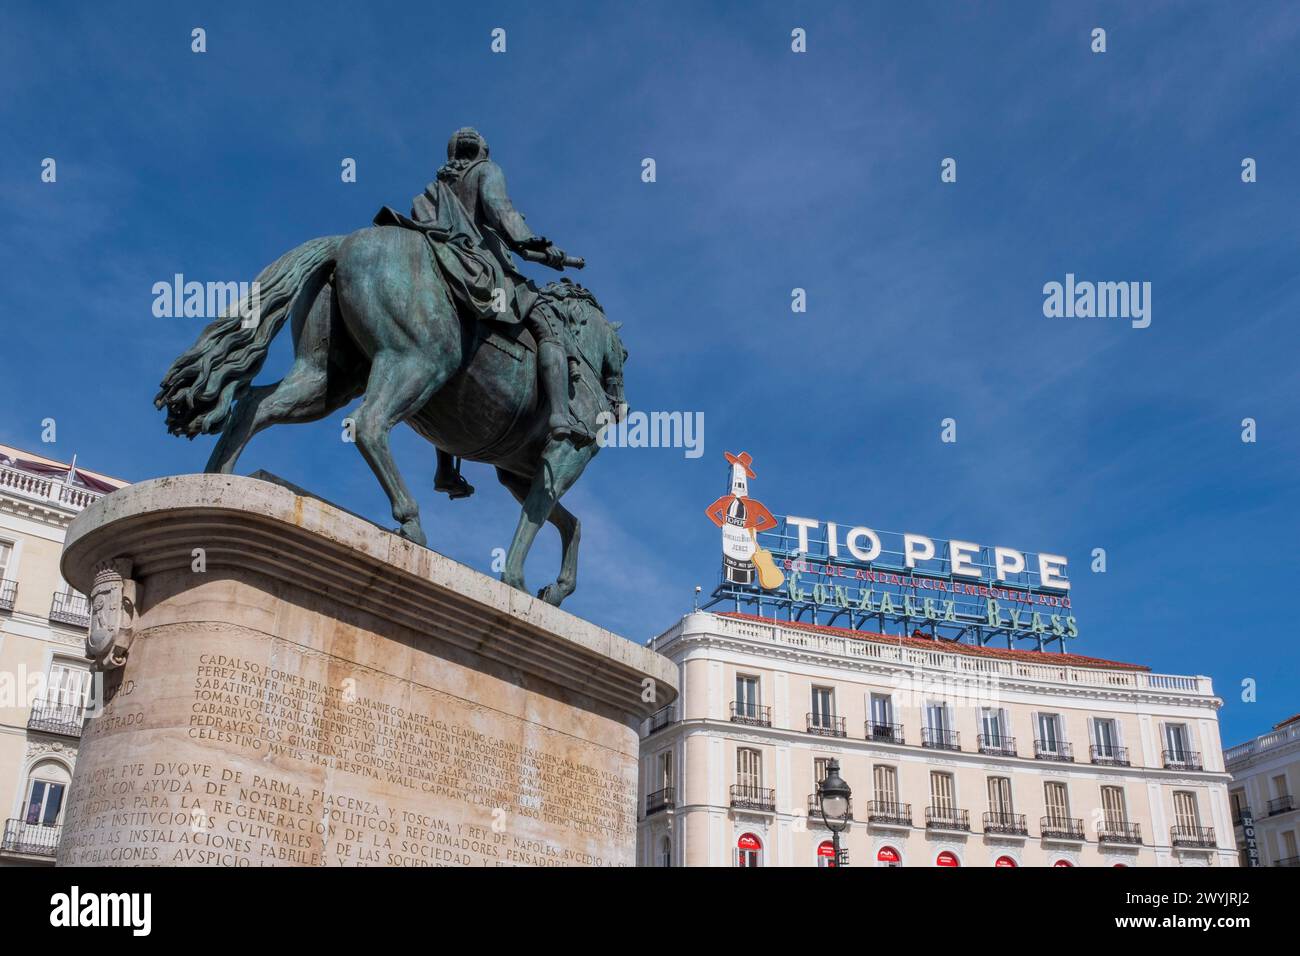 Spain, Madrid, Puerta del Sol, equestrian statue of King Charles III and wines Tio Pepe billboard advertisement on a roof of a building Stock Photo